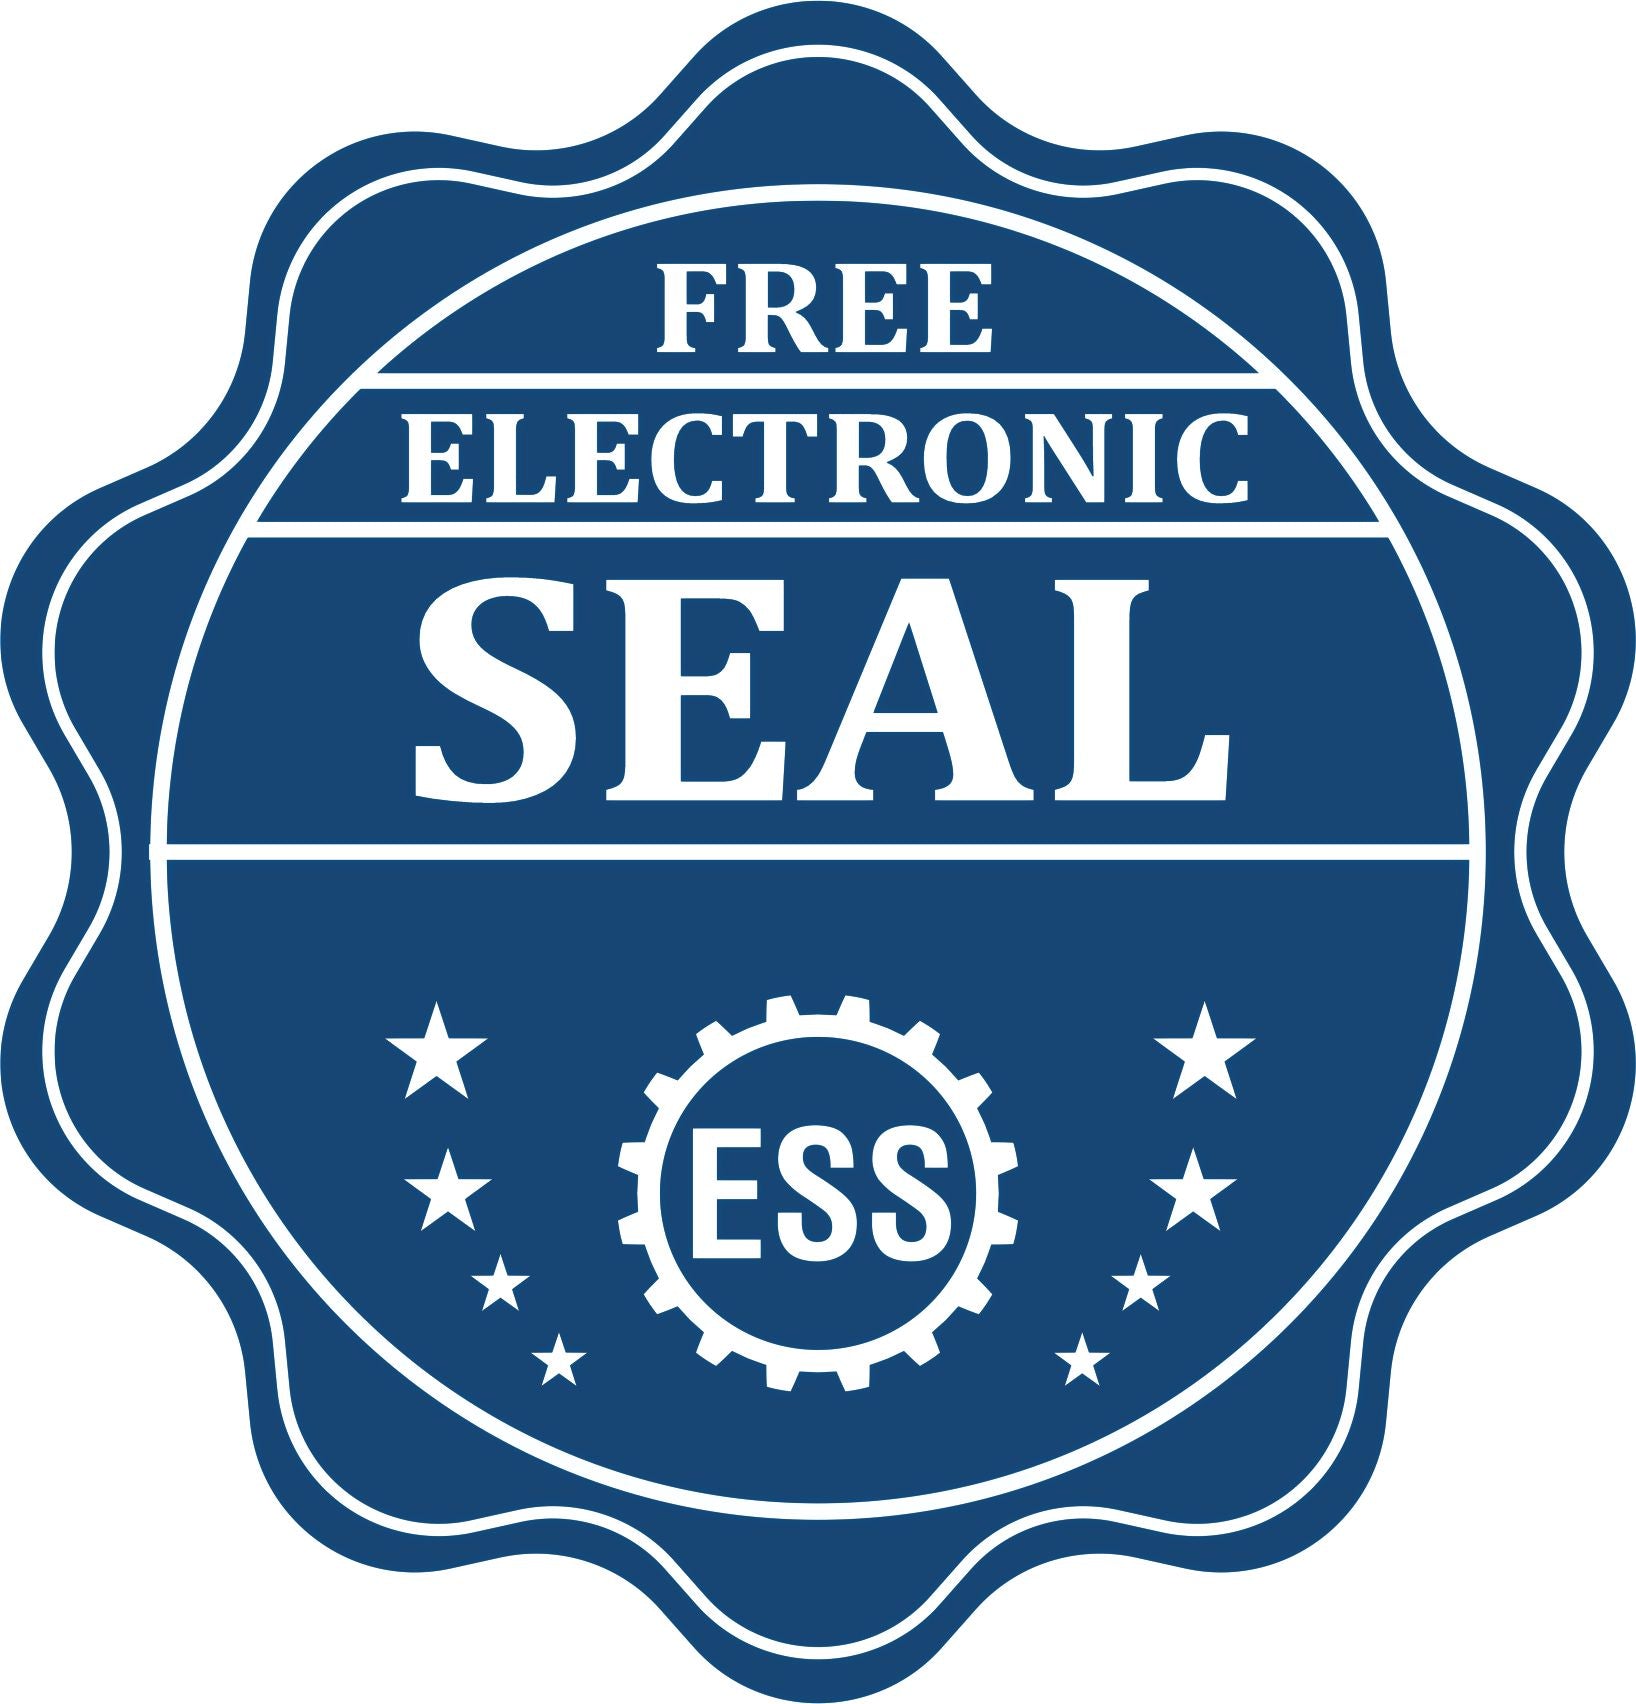 A badge showing a free electronic seal for the Soft Montana Professional Engineer Seal with stars and the ESS gear on the emblem.